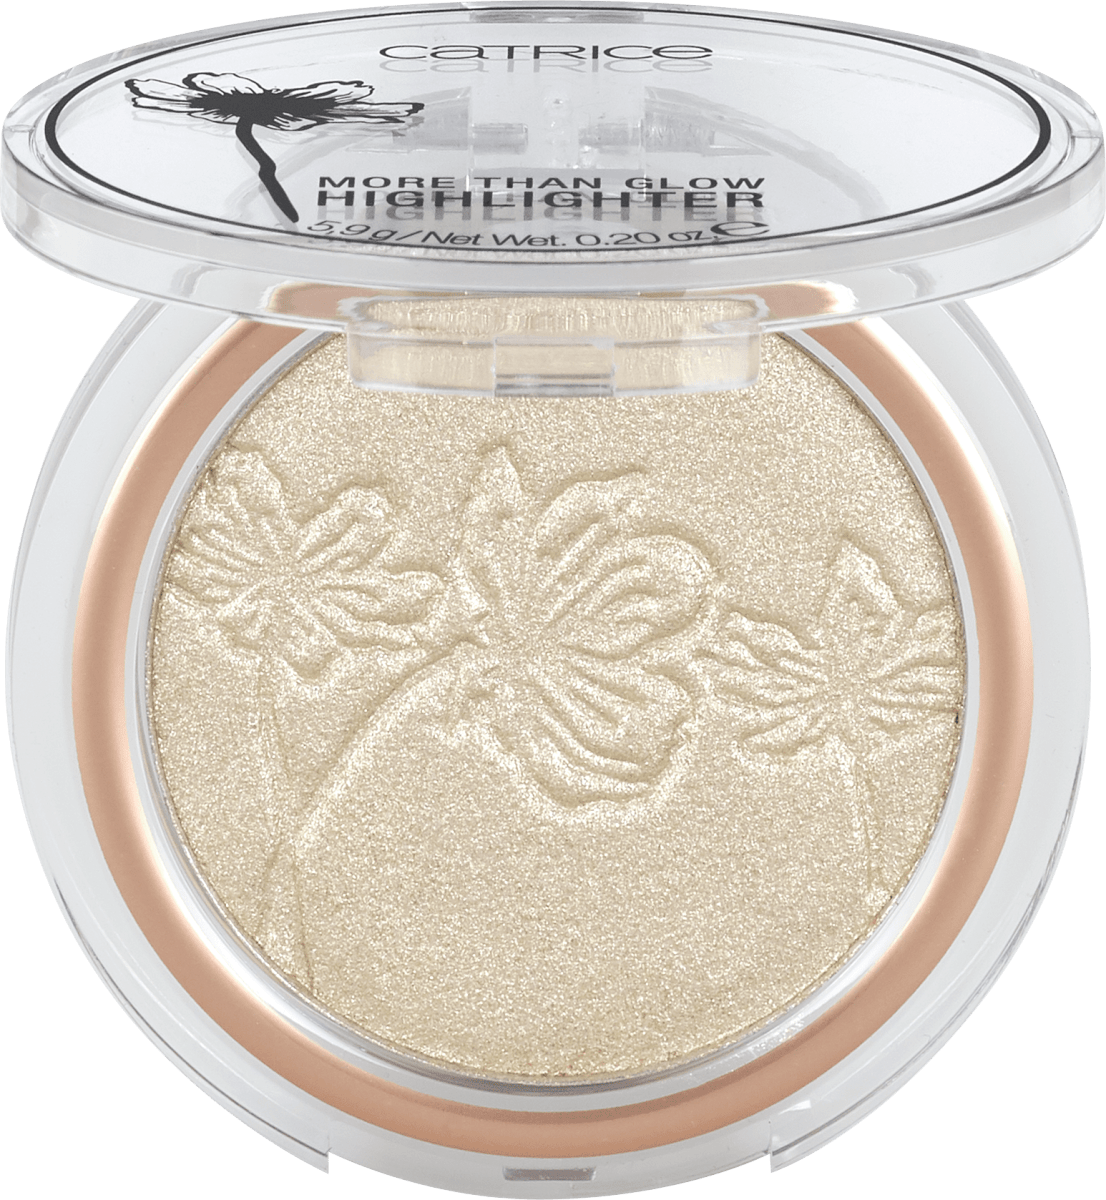 Catrice Highlighter More Than Glow 010 Ultimate Platinum Glaze, 5,9 g